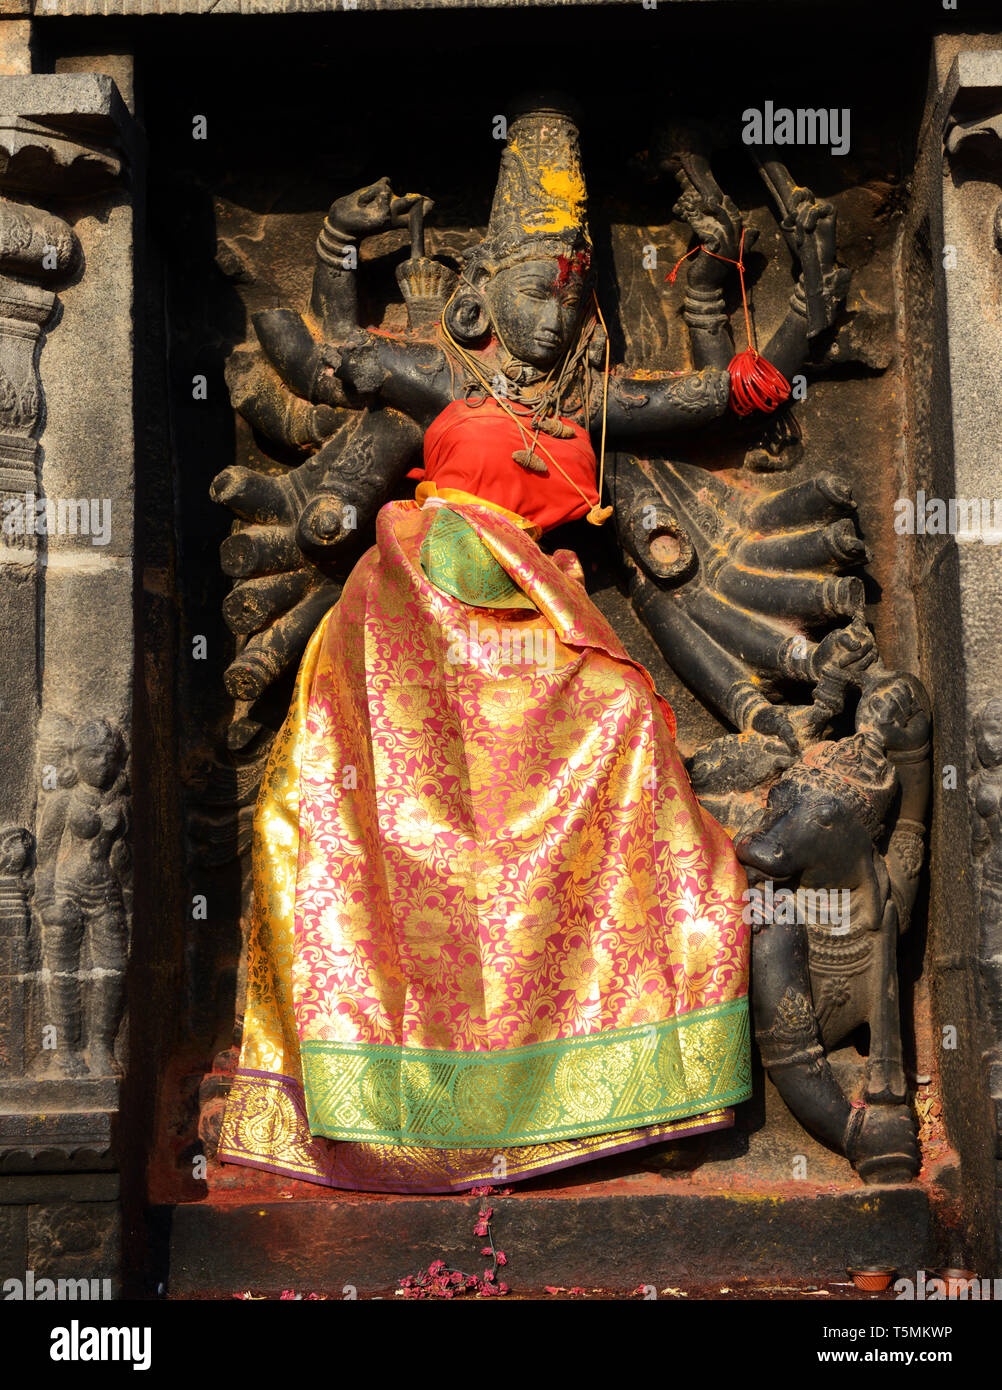 An old releif of the god Shiva in the form of the dancing lord Natrajah in the Thillai Natarajah temple in Chidambaram, India. Stock Photo